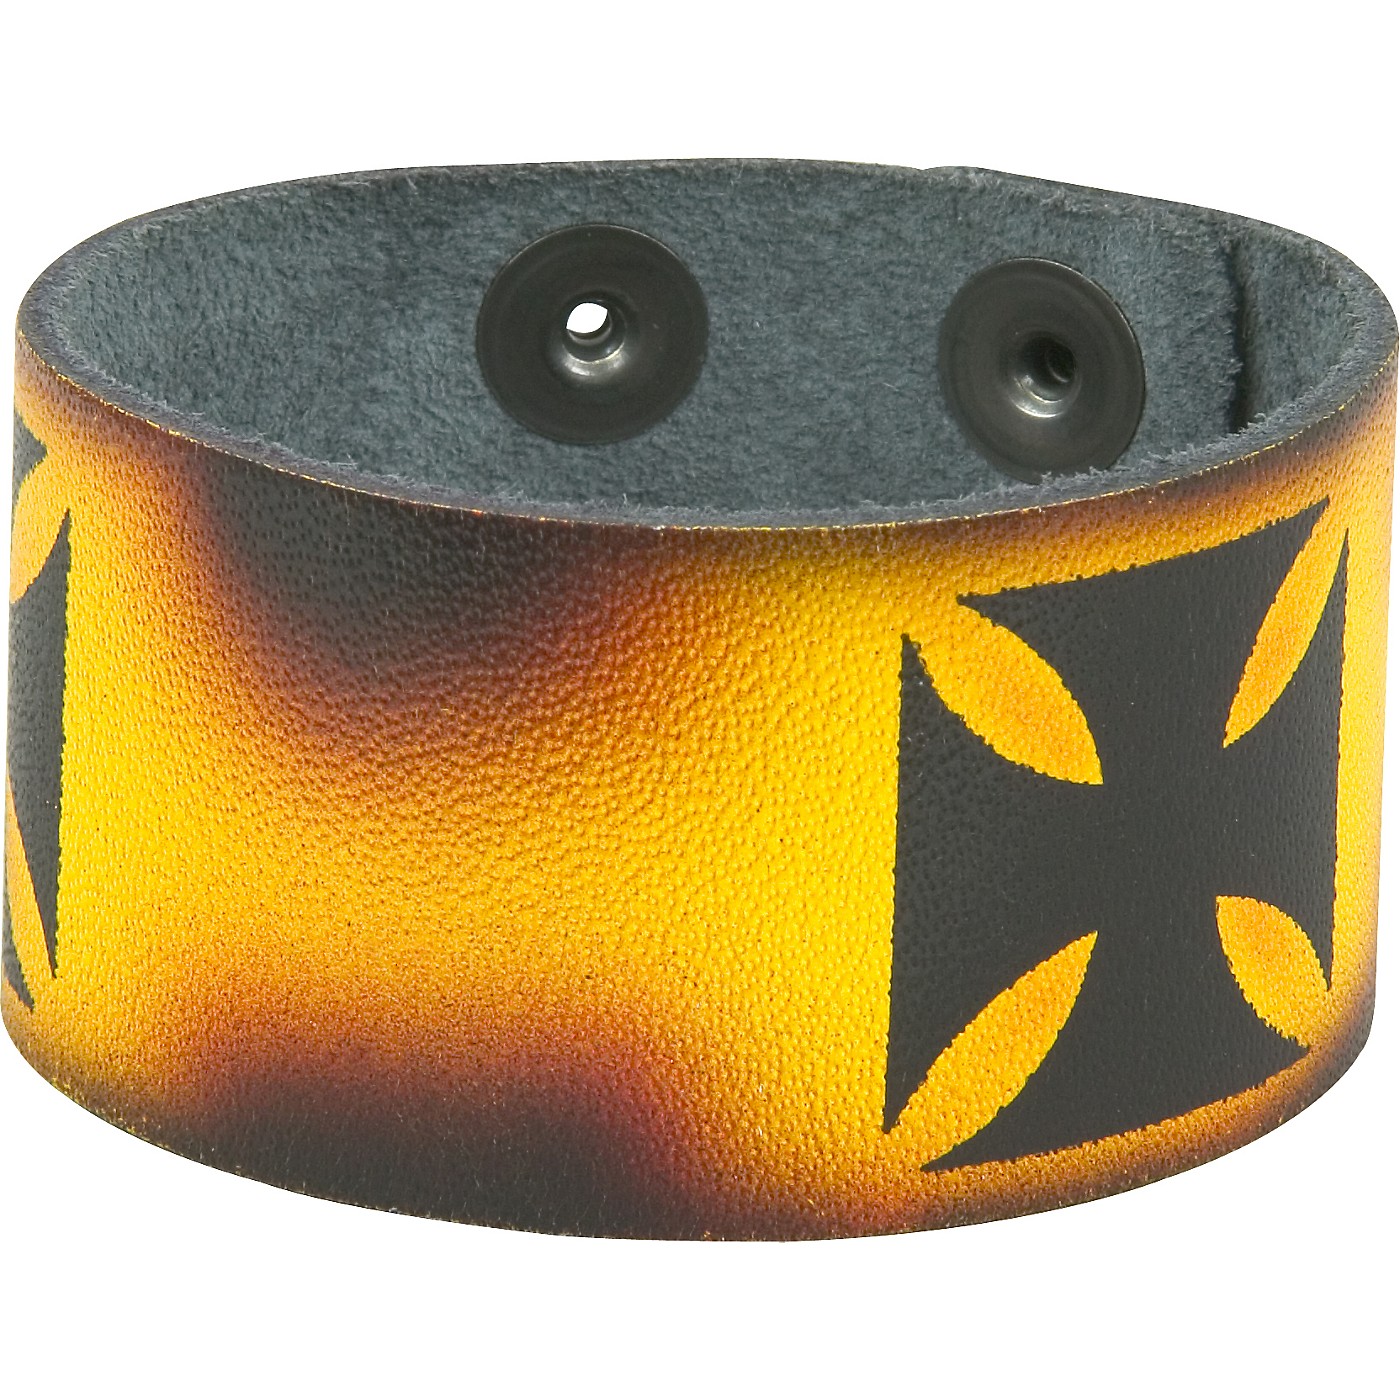 Perri's Leather Bracelet with Airbrushed Design thumbnail